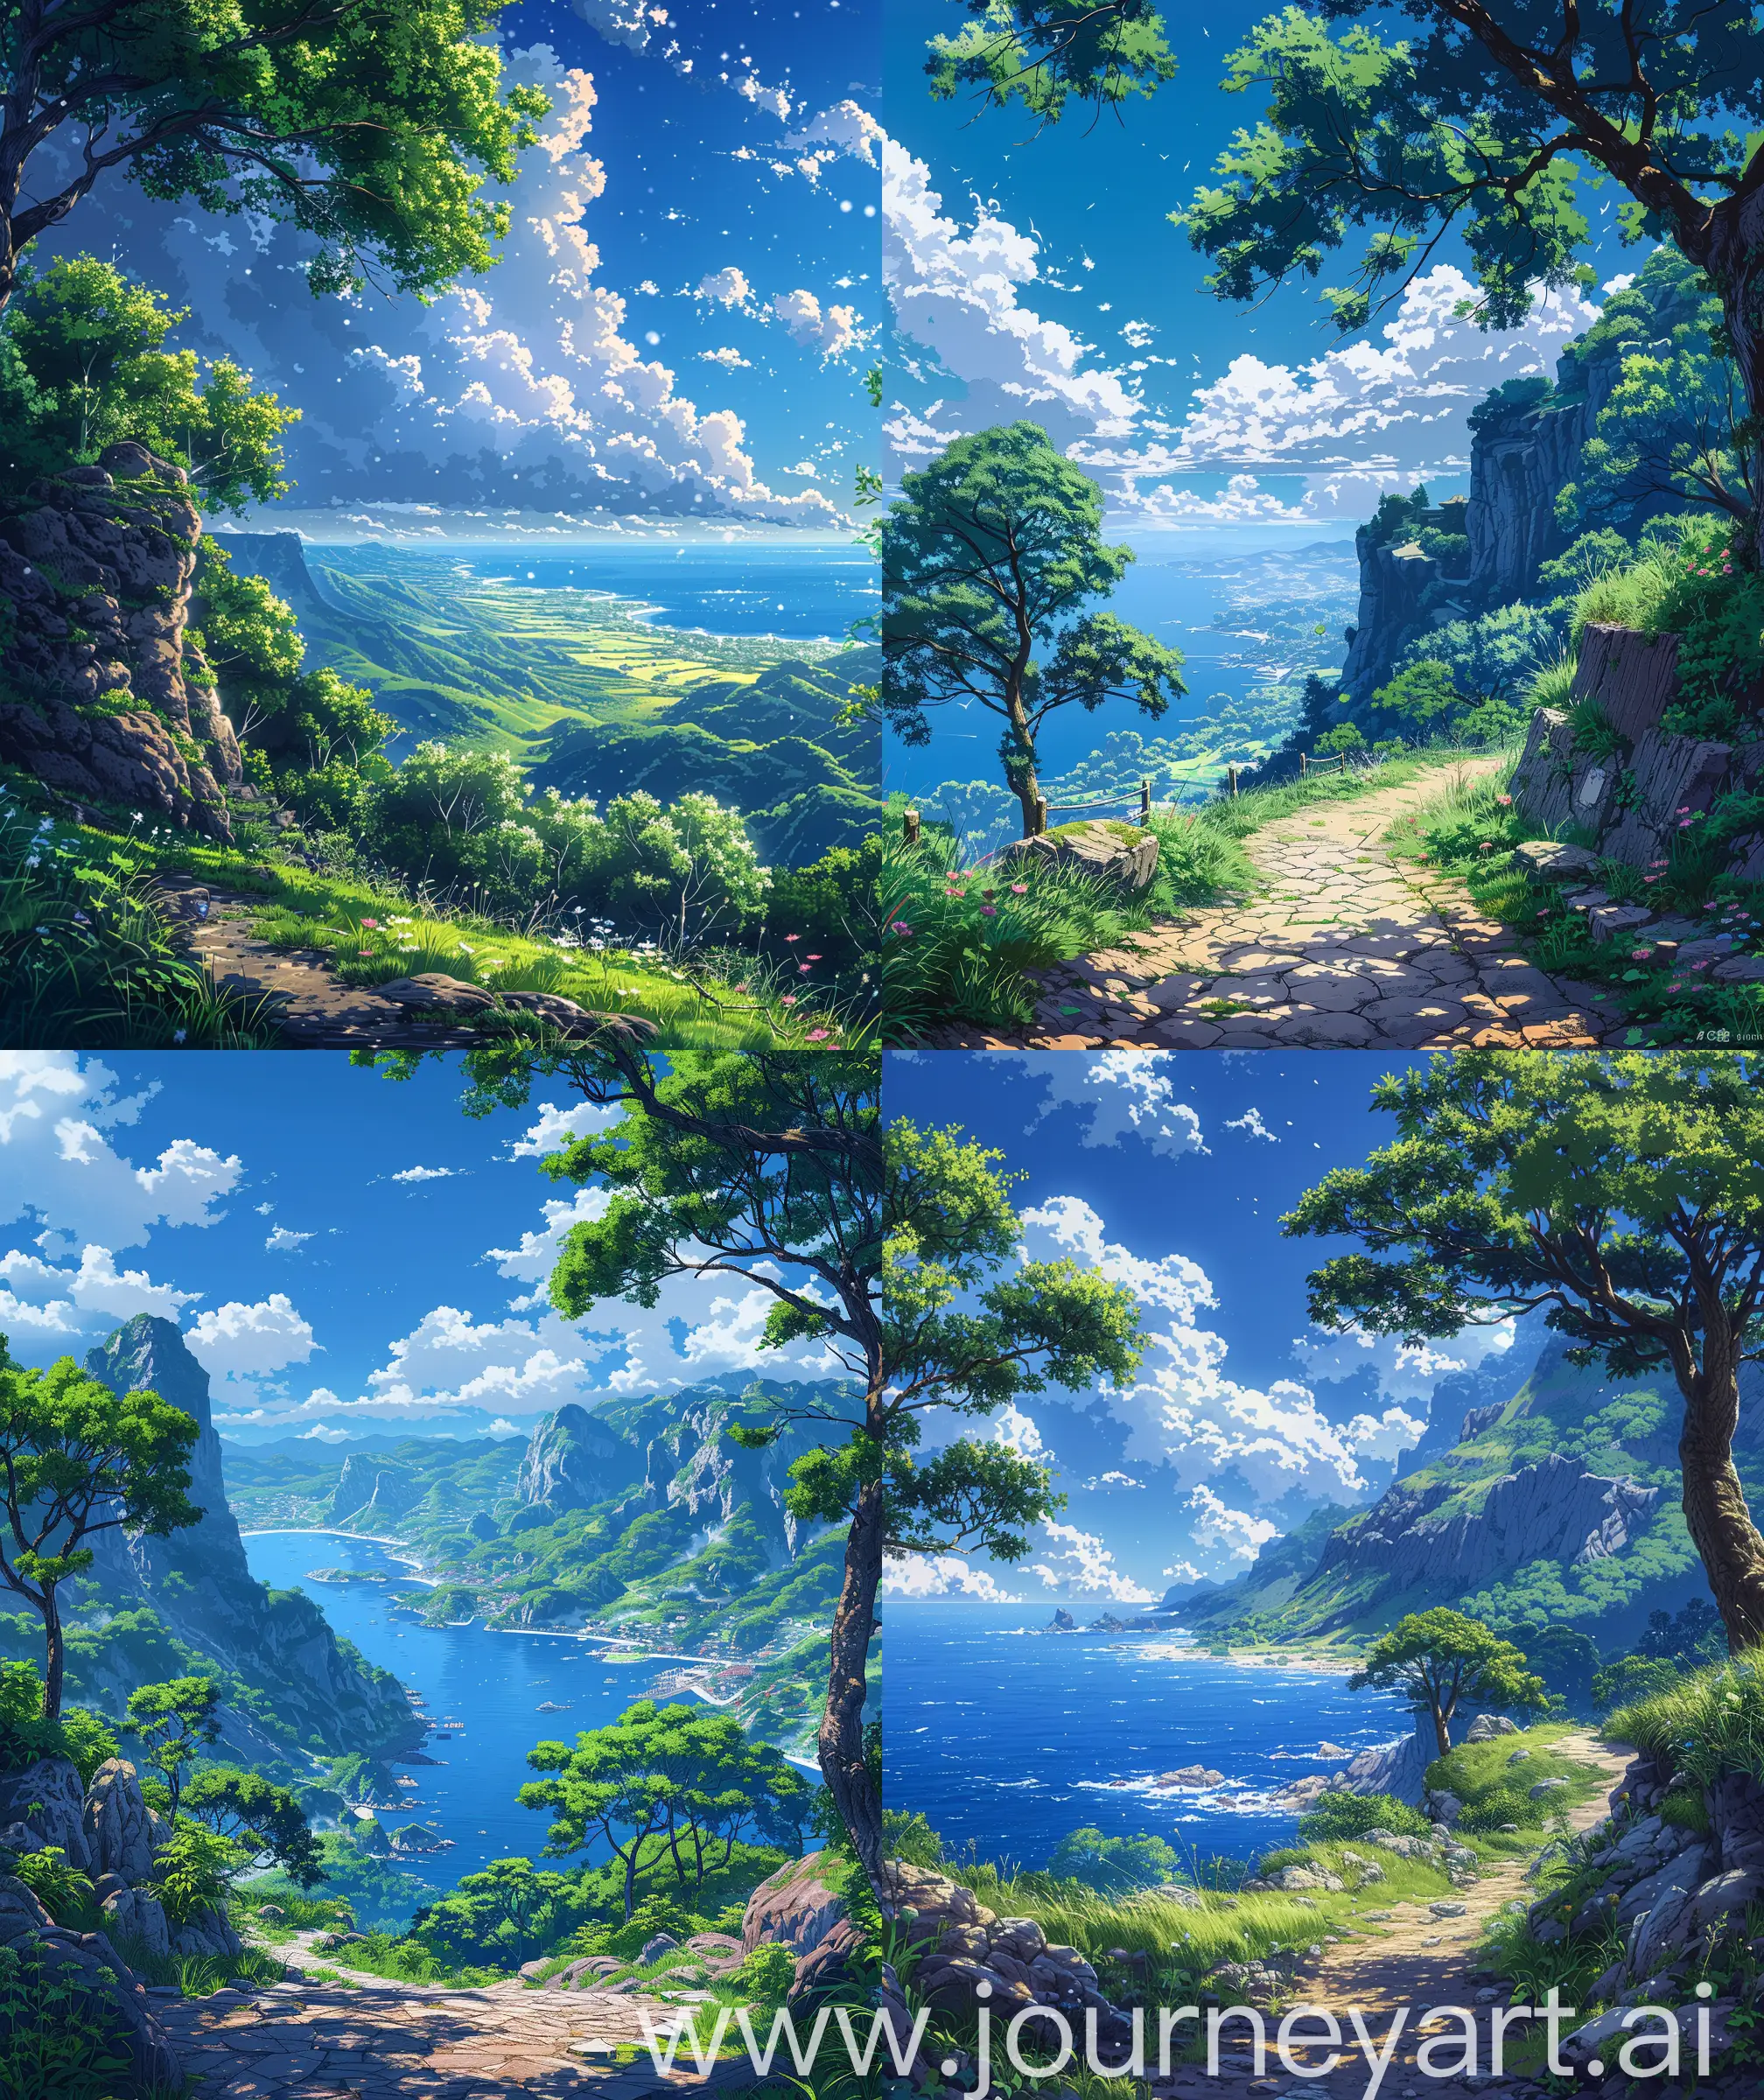 Beautiful anime scenary, mokoto shinkai style,
a beautiful summer time, "verious places of earth's nature scenaries ", anime style different places with quite and calm view, beautiful blue sky, morning time, illustration ultra HD, high quality, sharp details, no blurry, no hyperrealistic --ar 27:32 --s 600